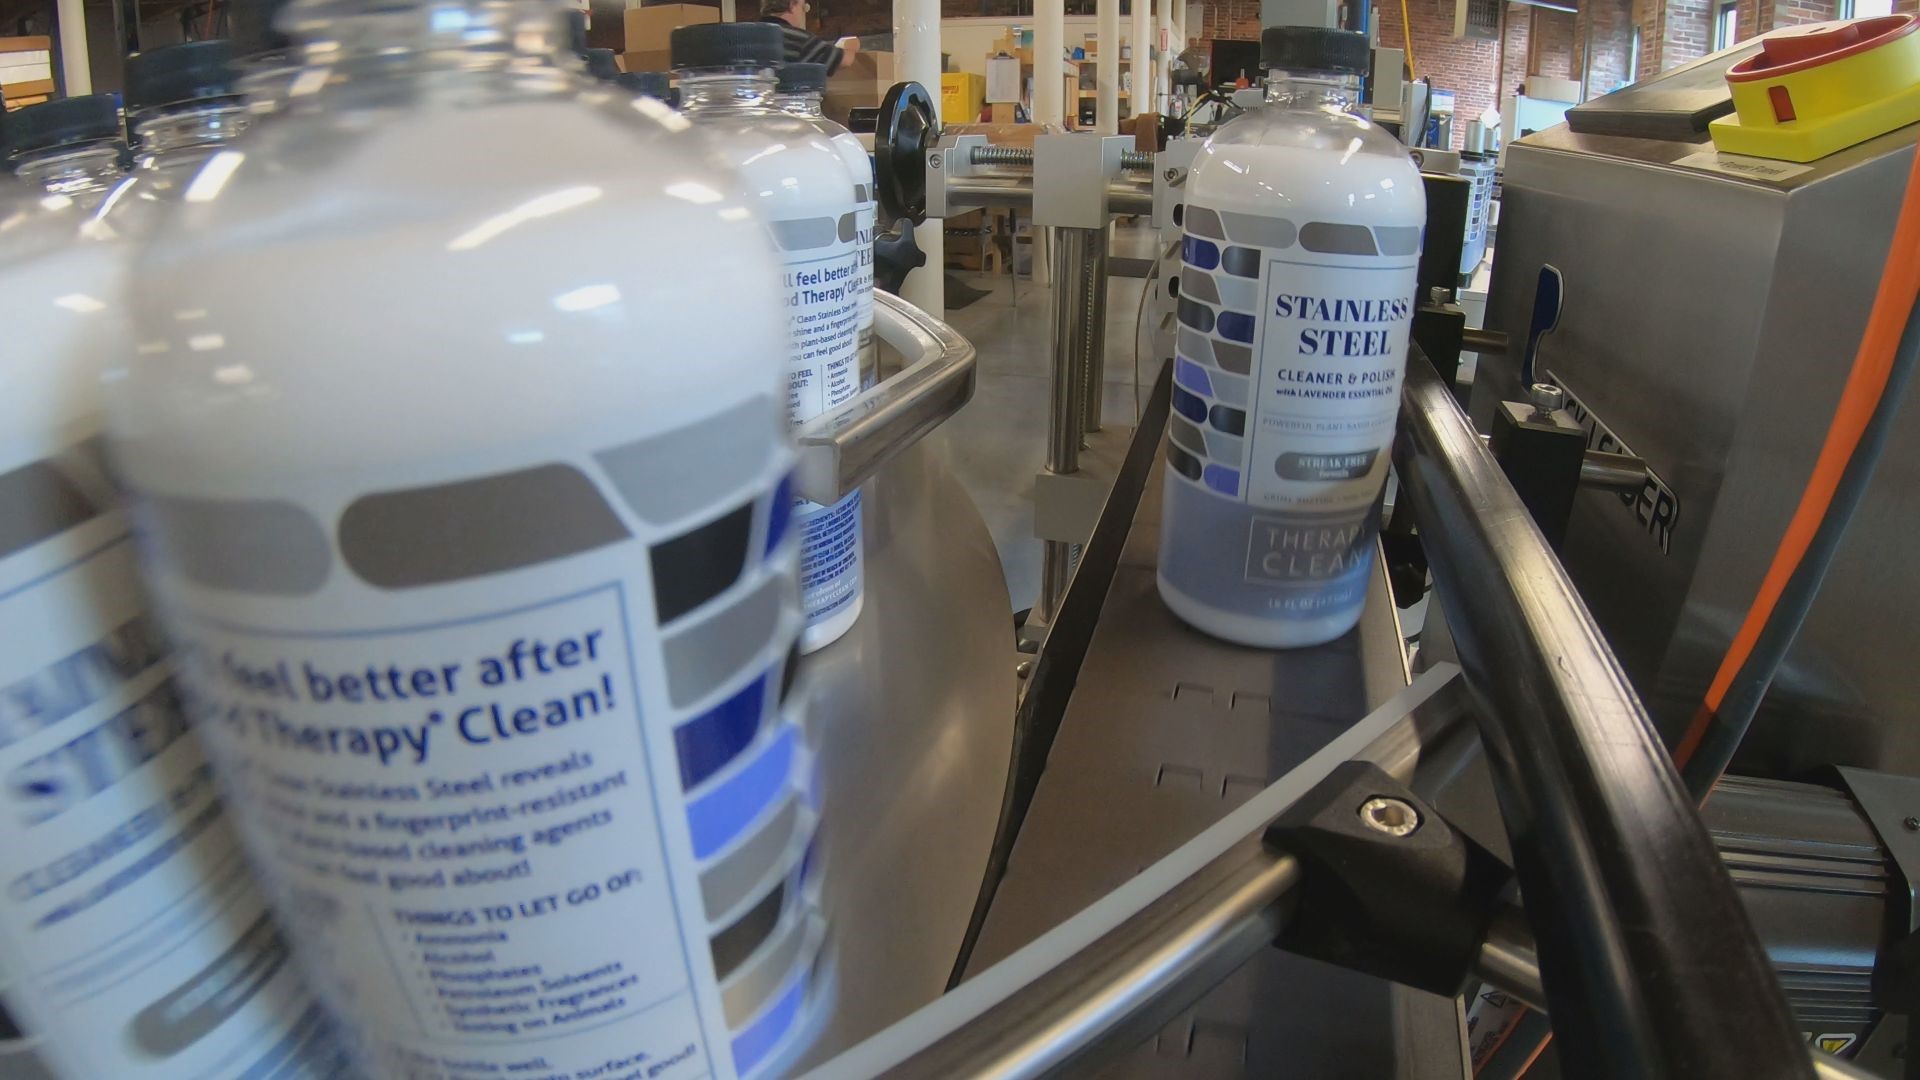 A couple from New Hampshire are growing their small business in Somersworth, making plant-based cleaners for speciality surfaces like stainless steel and granite.